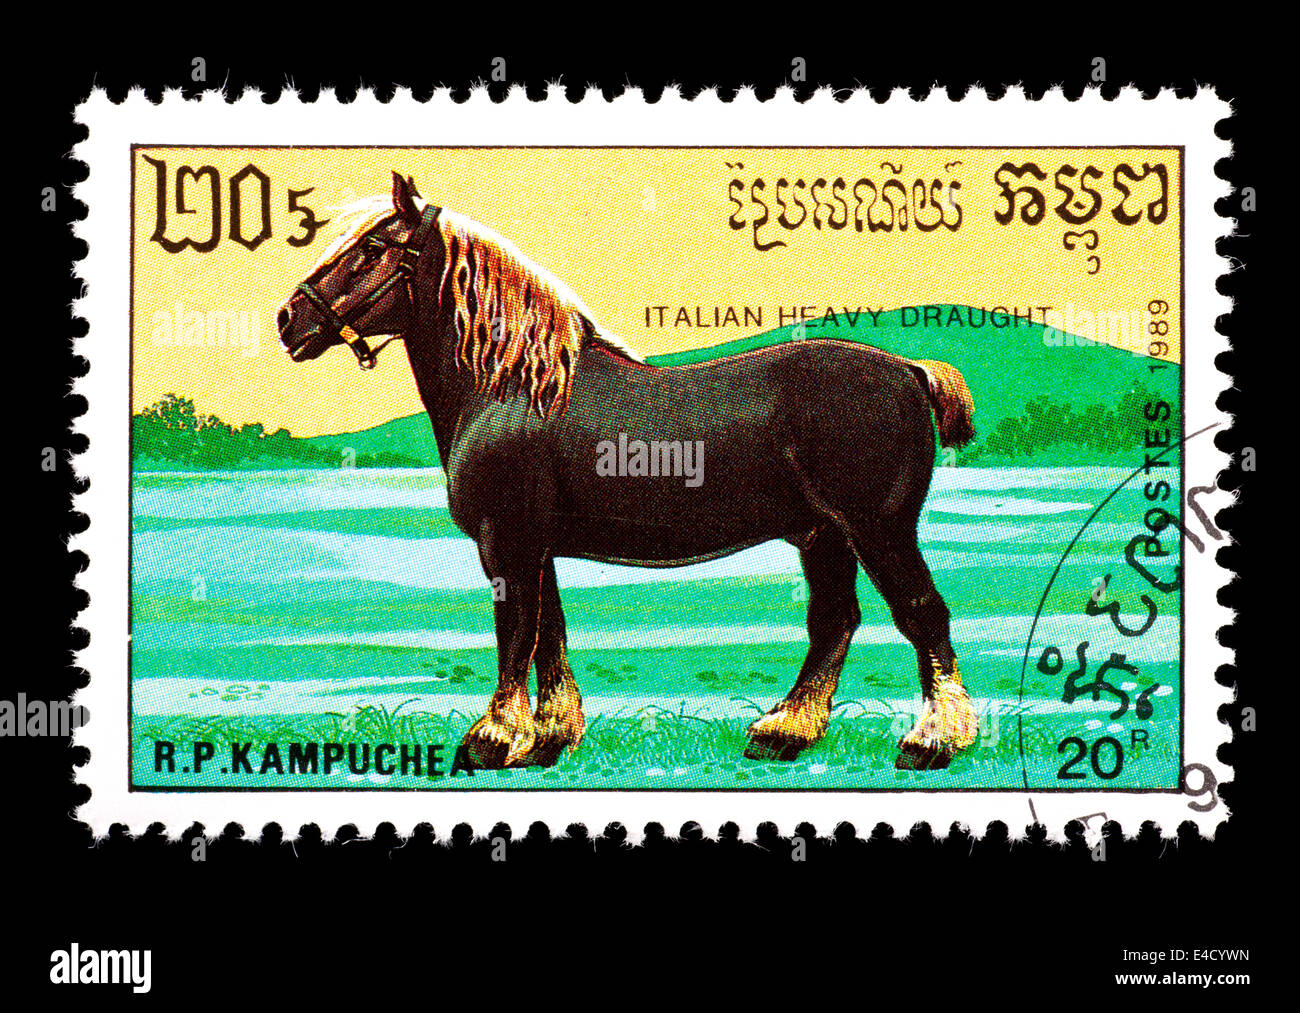 Postage stamp from Cambodia (Kampuchea) depicting a Italian heavy draft horse. Stock Photo